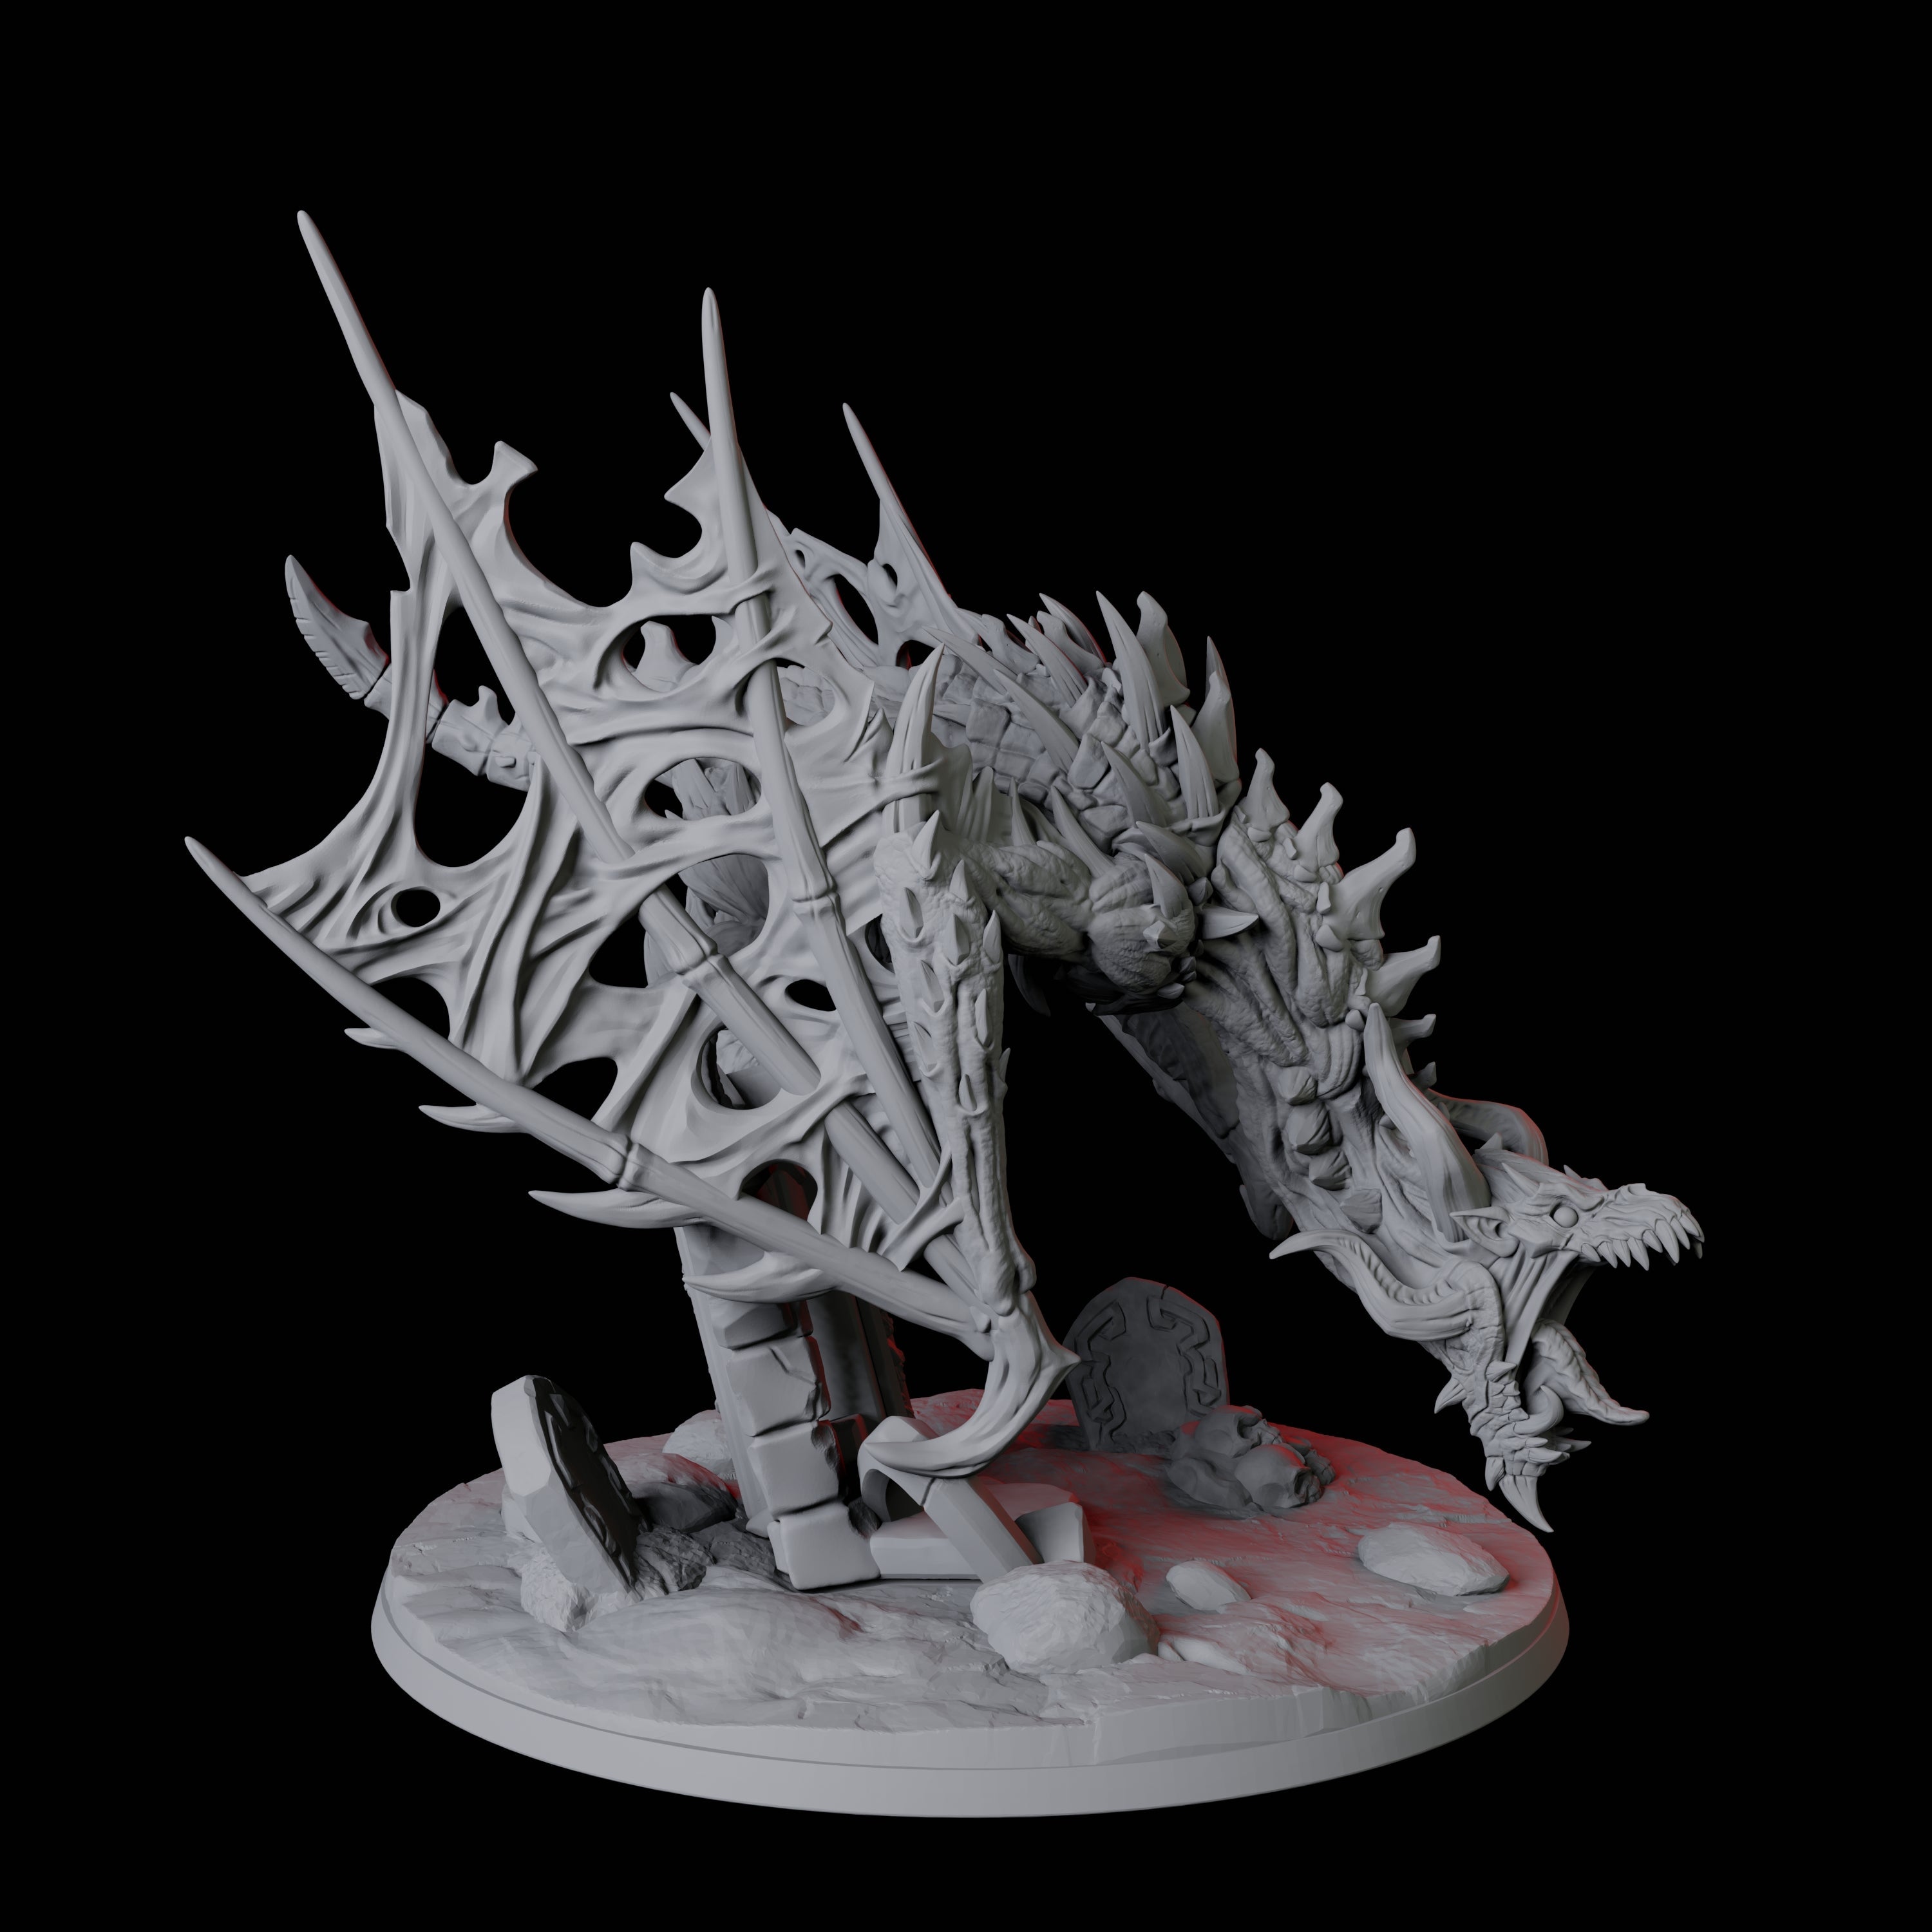 Undead Bone Dragon Miniature for Dungeons and Dragons, Pathfinder or other TTRPGs